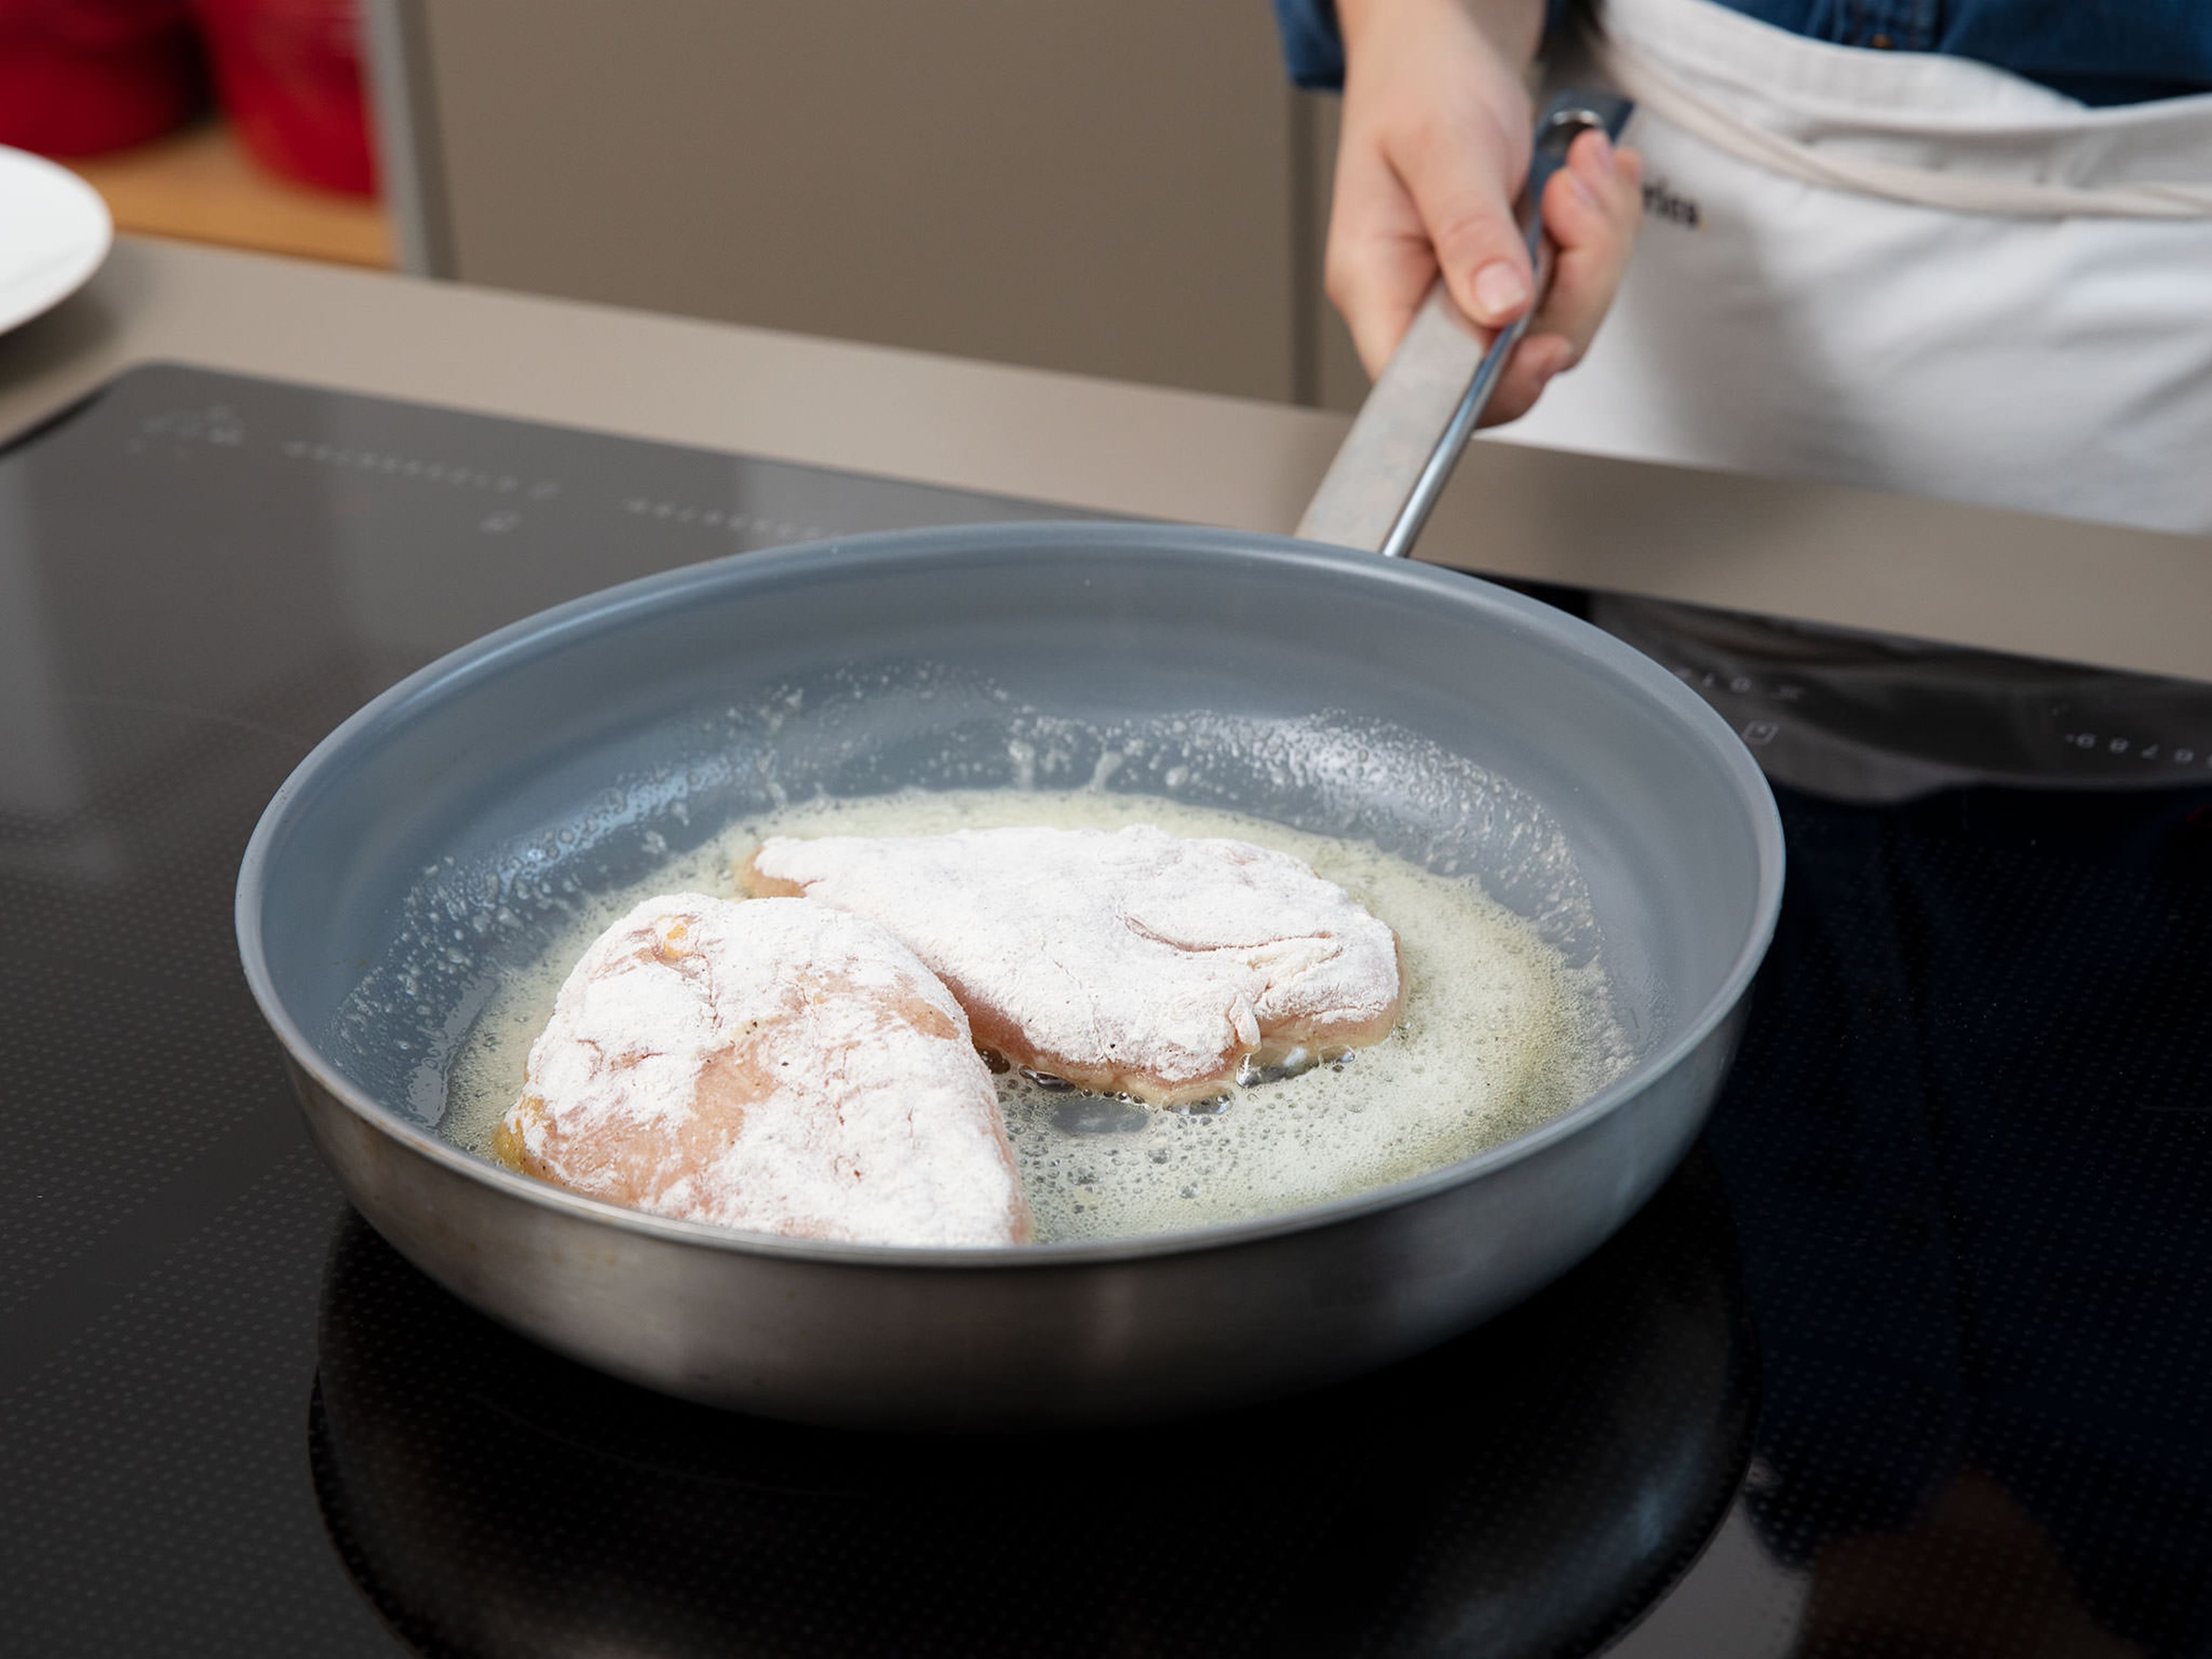 Heat butter in a frying pan set over medium-high heat. Fry chicken breasts for approx. 5 min., then flip and fry for another approx. 2 min. Remove chicken breasts from the frying pan. Add onion and garlic and fry until translucent.